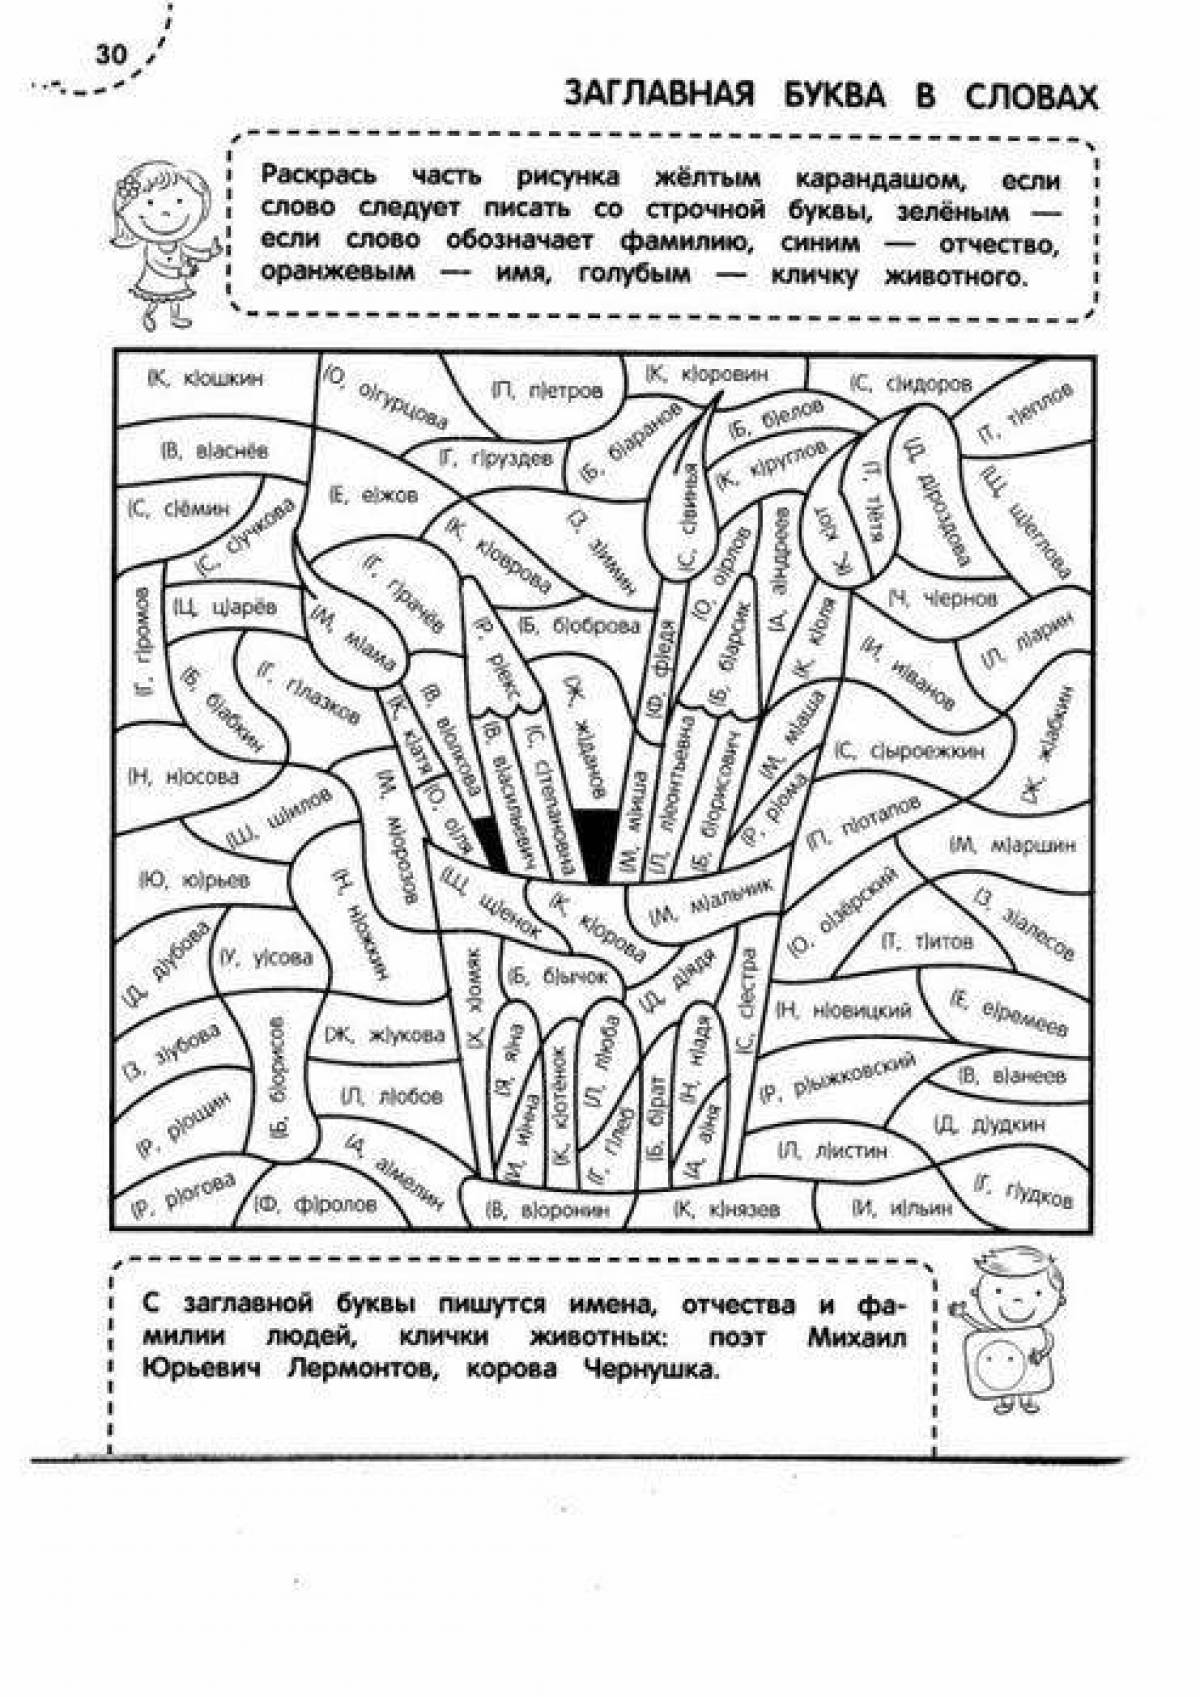 A fascinating coloring book in Russian, Grade 2 with assignments